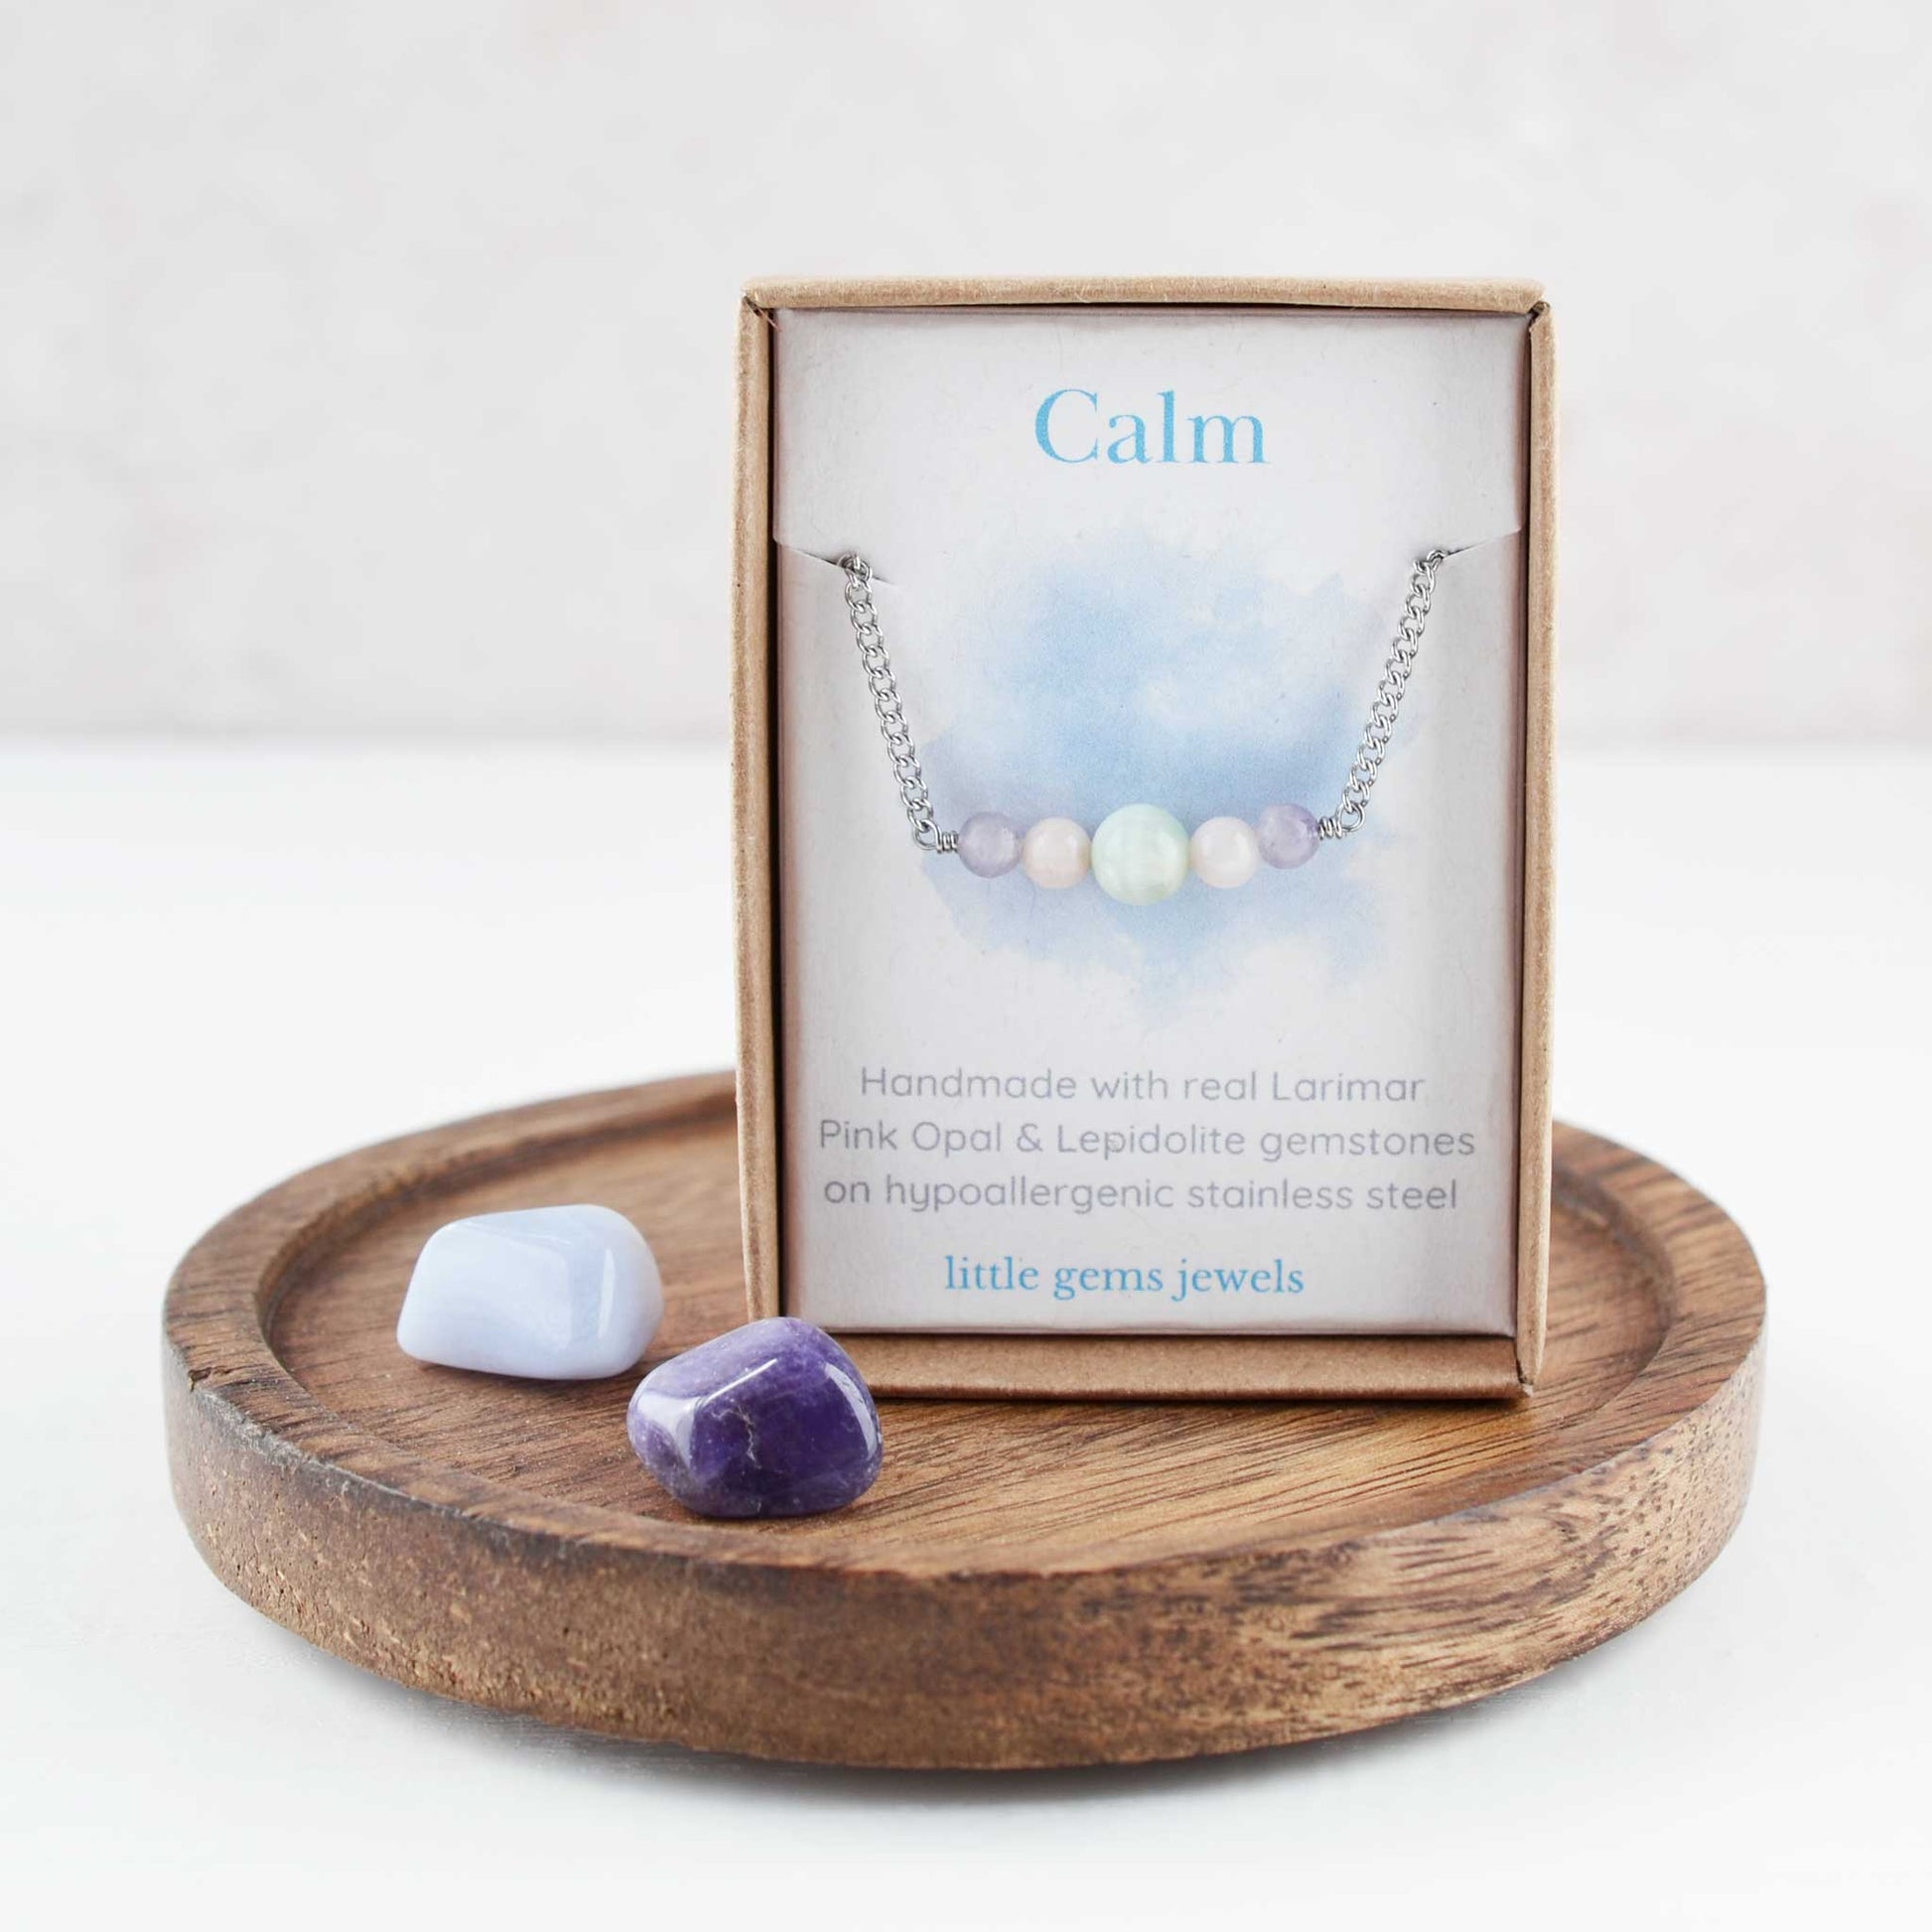 Gemstones for calm dainty necklace in eco friendly gift box